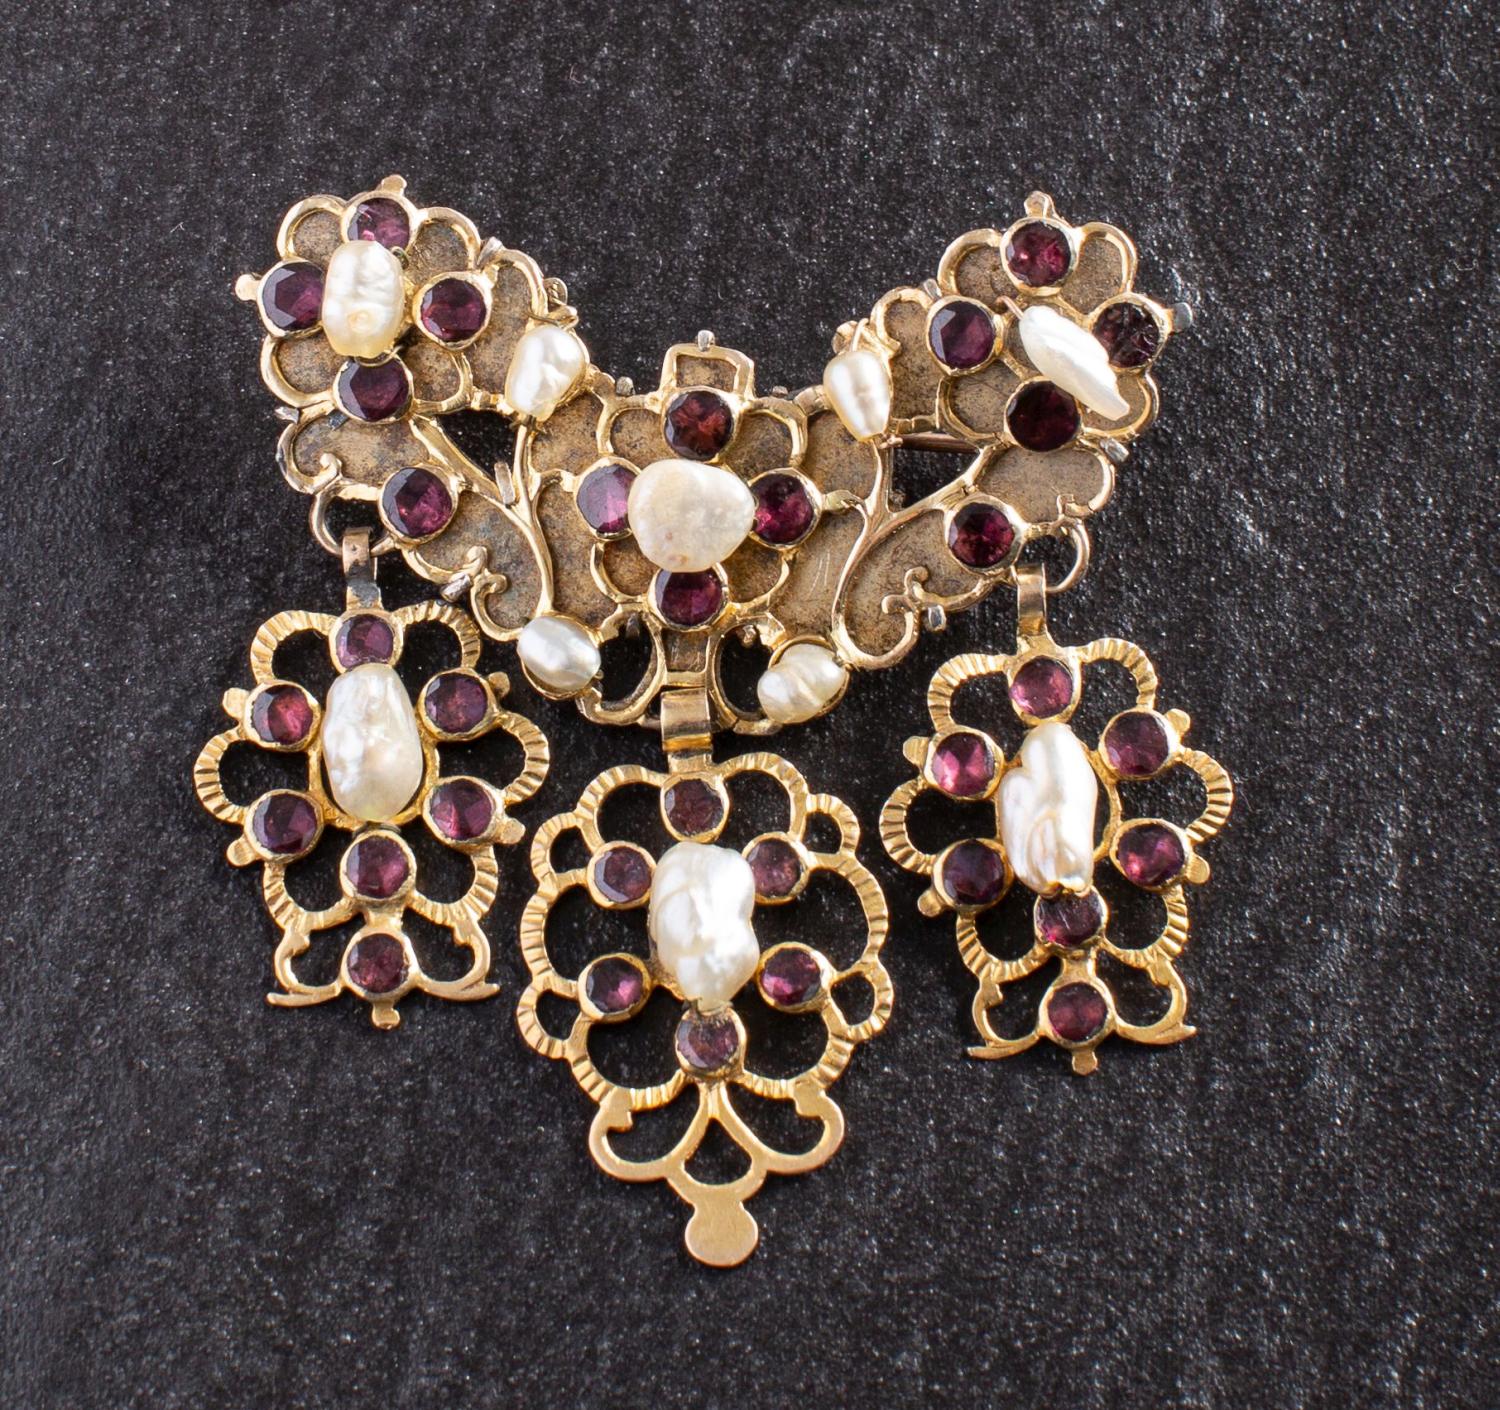 A 19th century, flat-cut, foil backed garnet and baroque-shaped pearl stomacher brooch/ pendant,